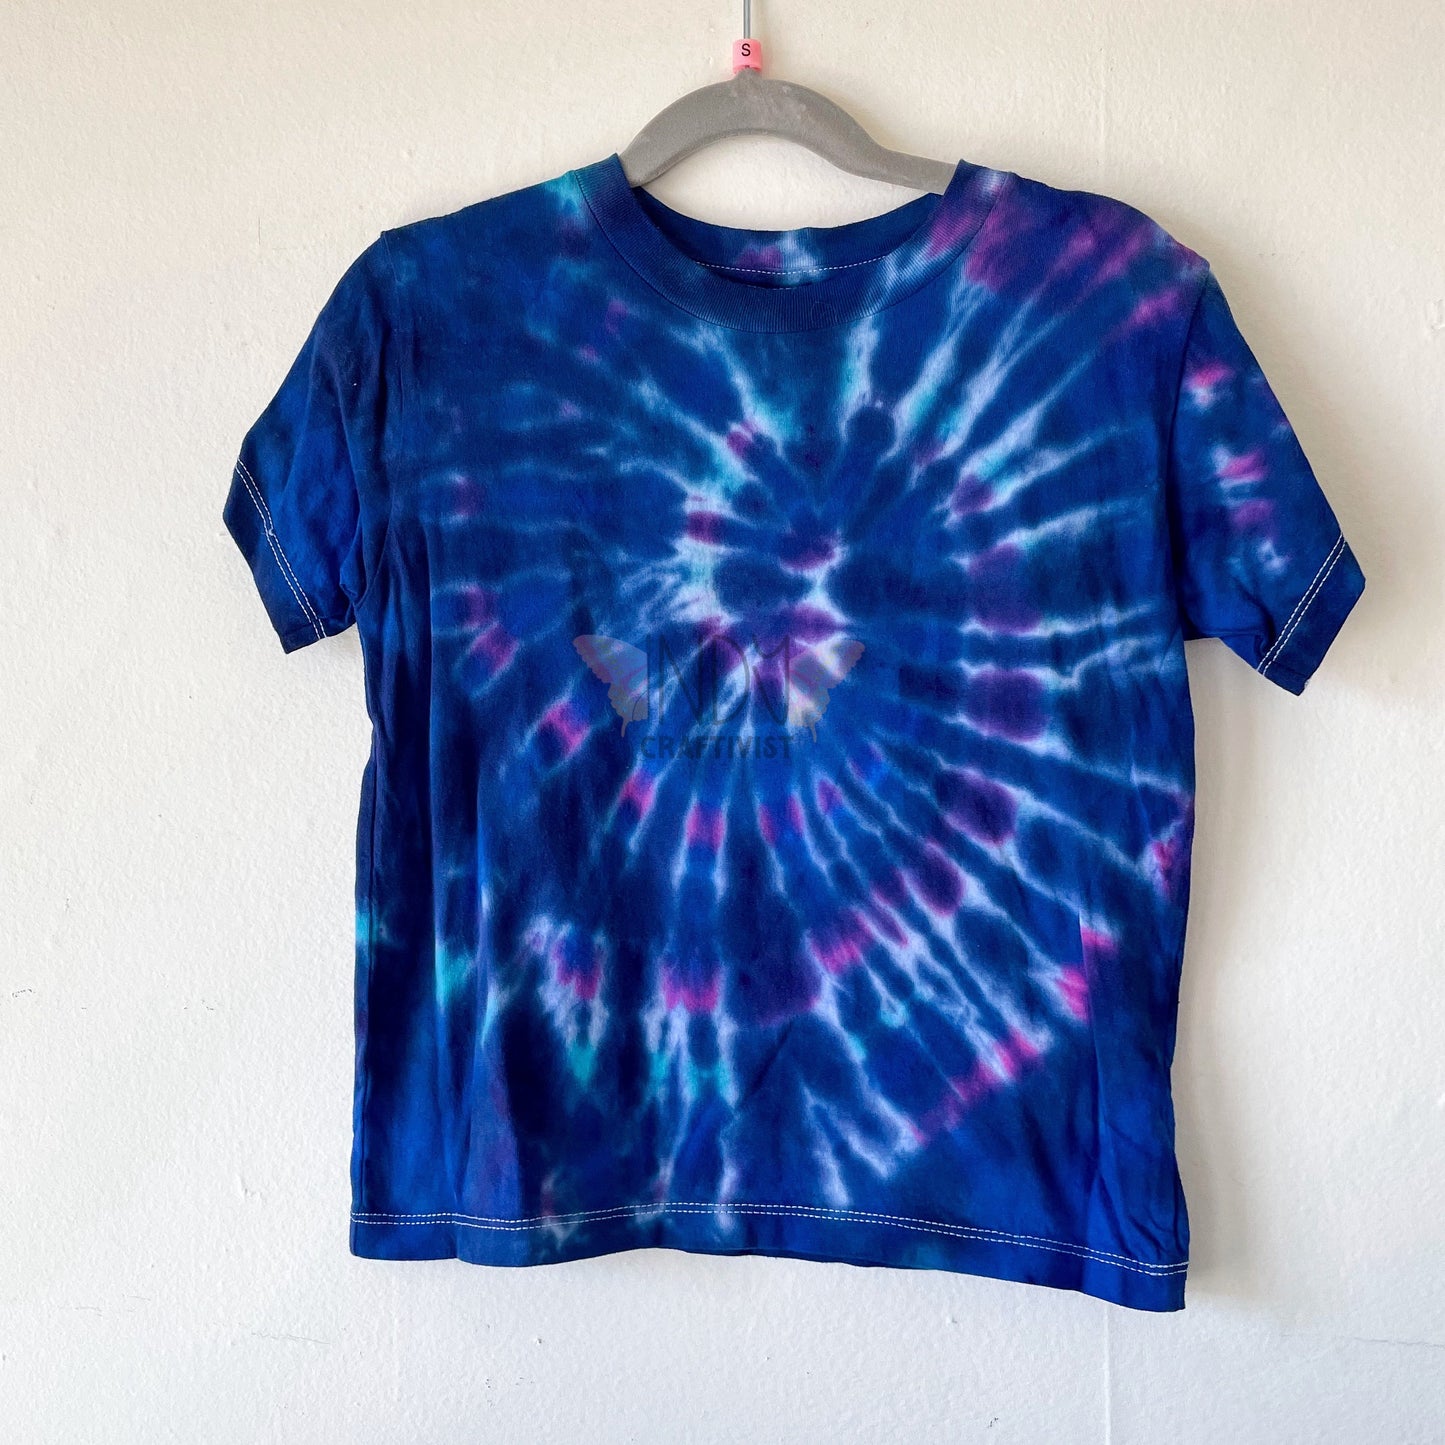 Kids Small Tie Dyed T-shirt